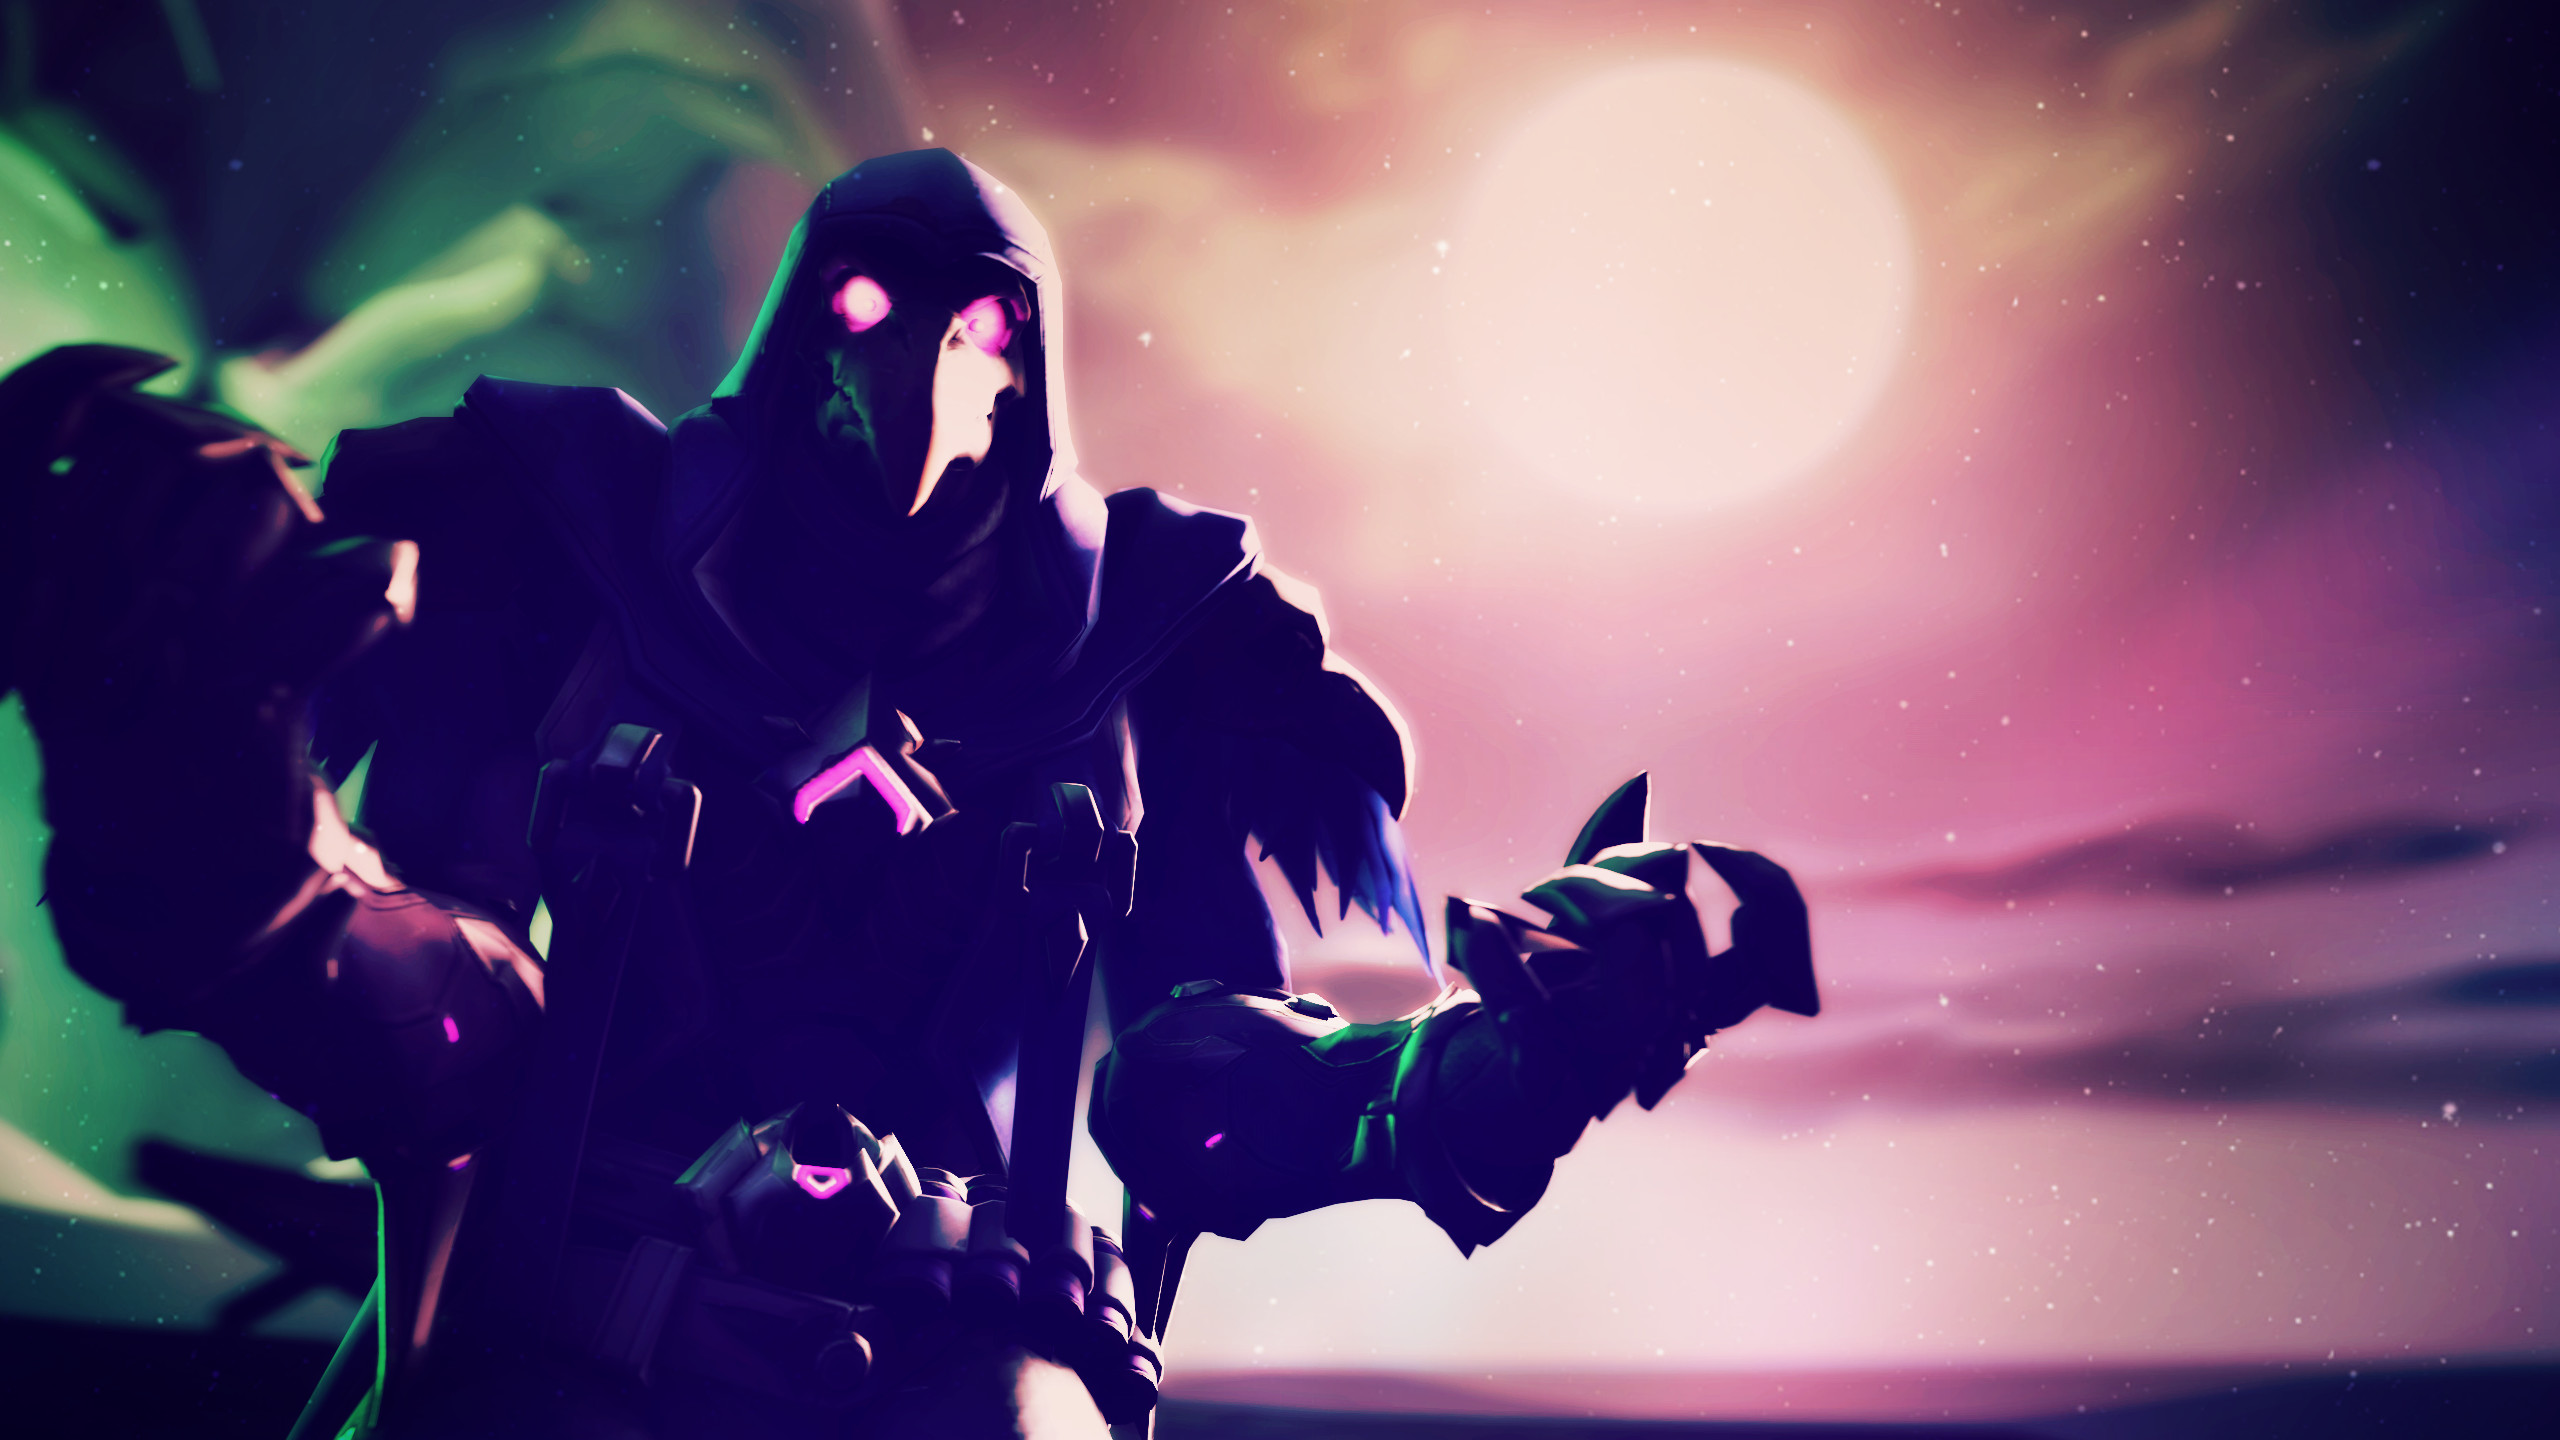 2560x1440 Overwatch - Plague Doctor by SpookySnood Overwatch - Plague Doctor by  SpookySnood